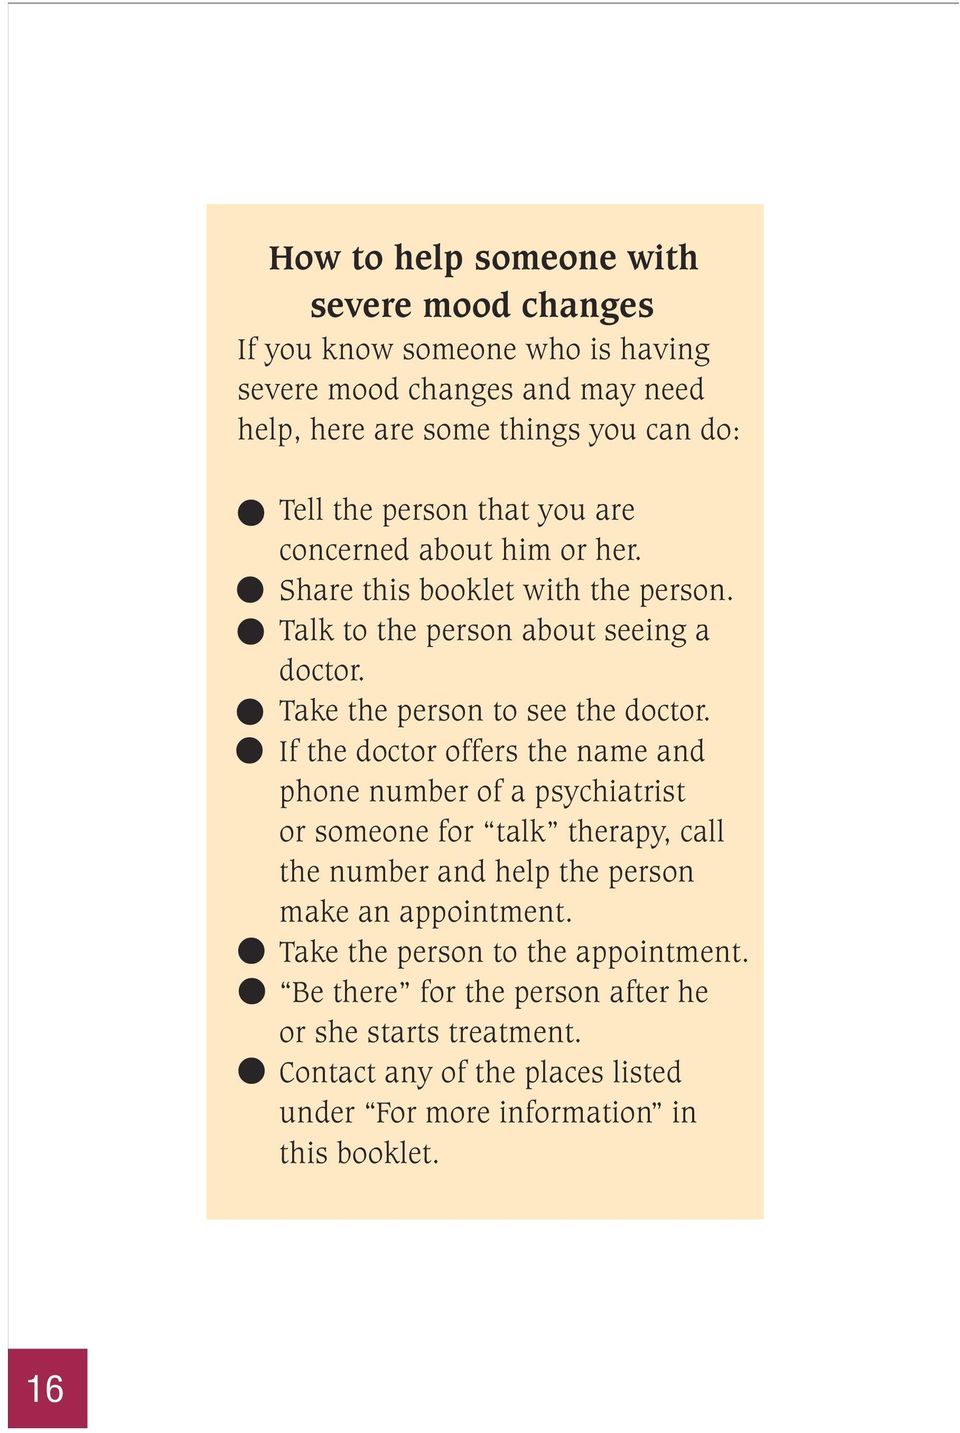 If the doctor offers the name and phone number of a psychiatrist or someone for talk therapy, call the number and help the person make an appointment.